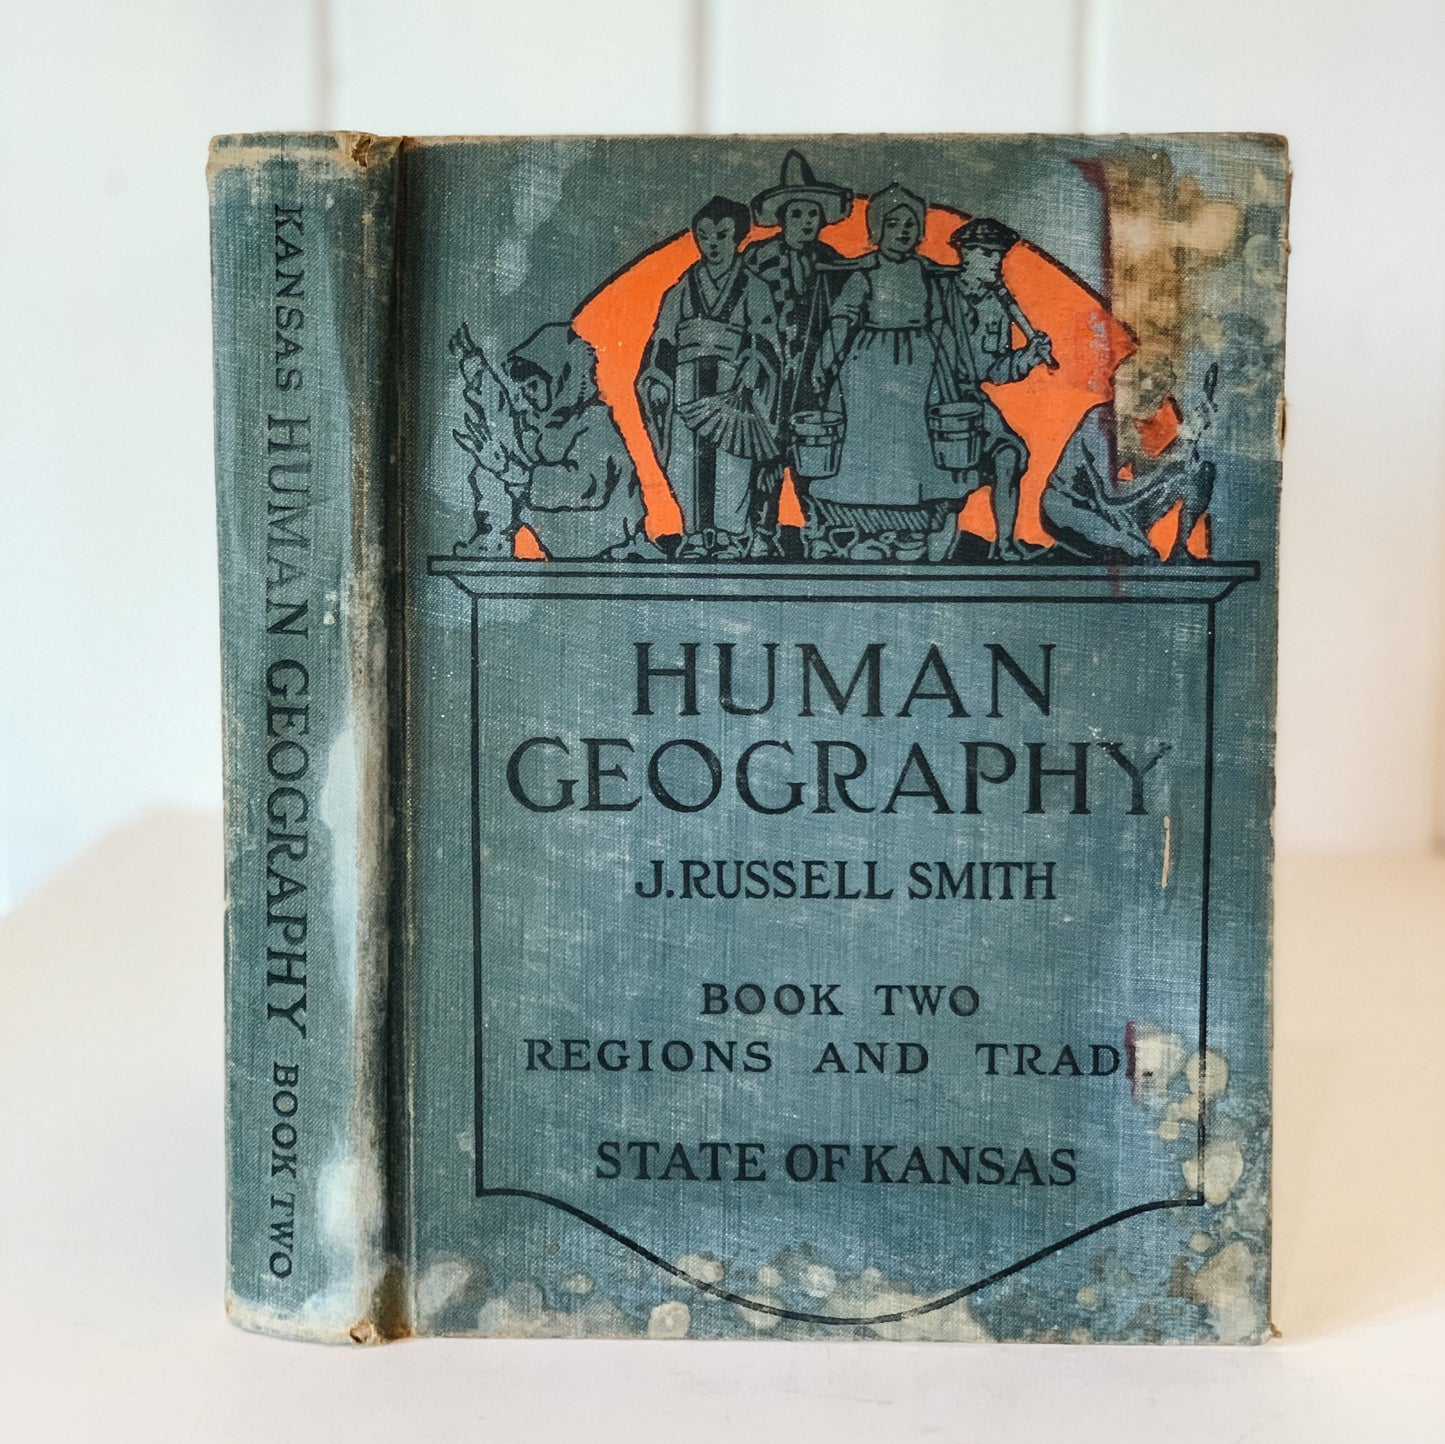 Human Geography, 1926 Oversized School Book, Hardcover